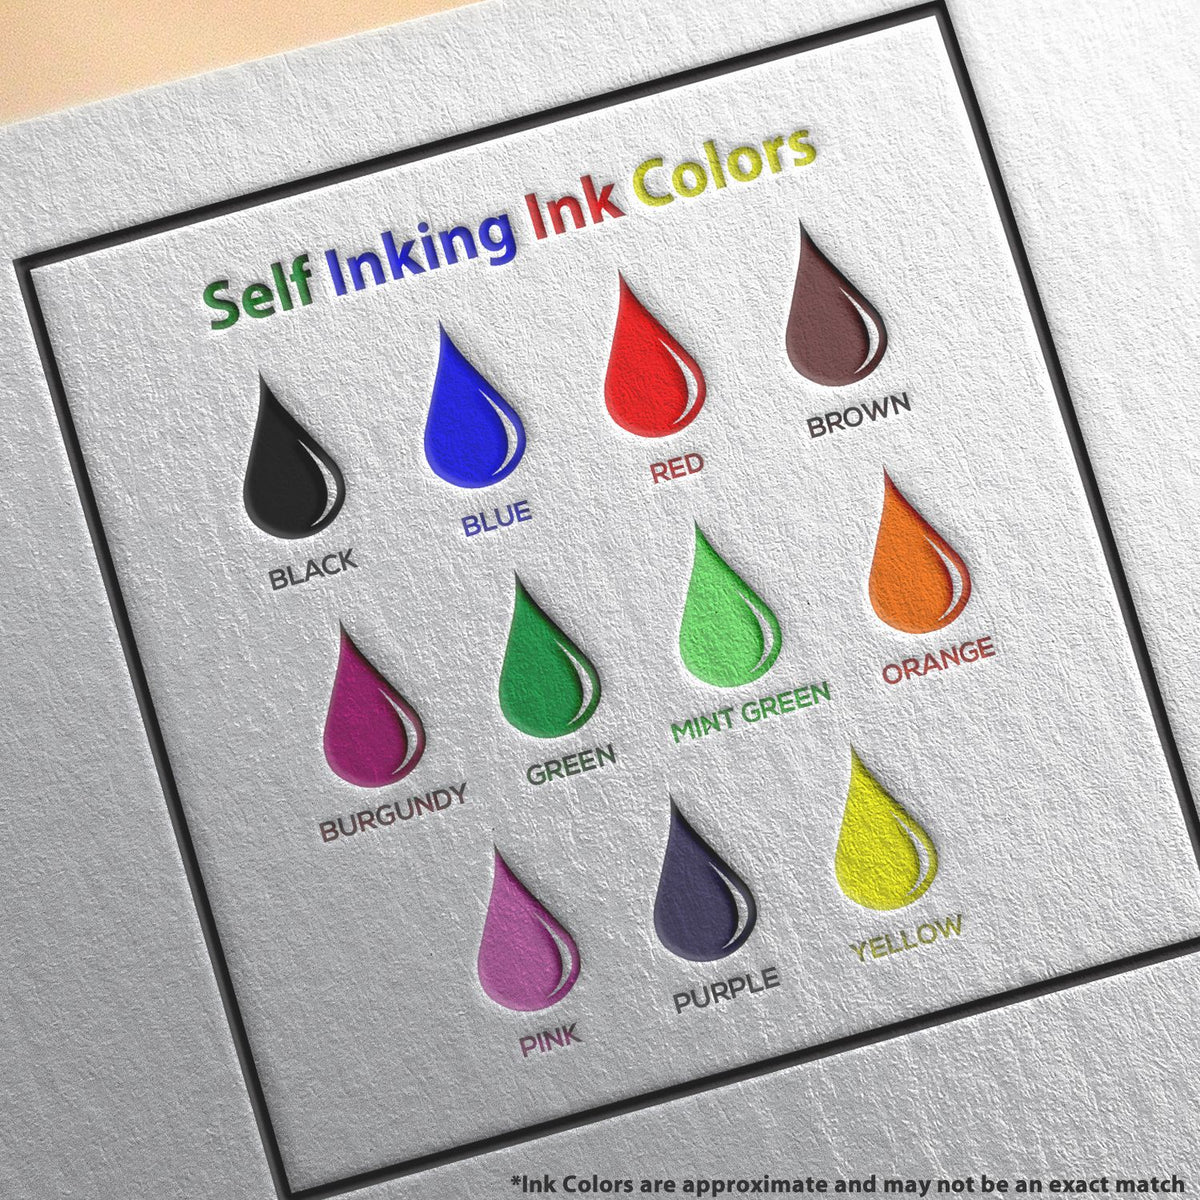 A picture showing the different ink colors or hues available for the Self-Inking Nebraska PE Stamp product.